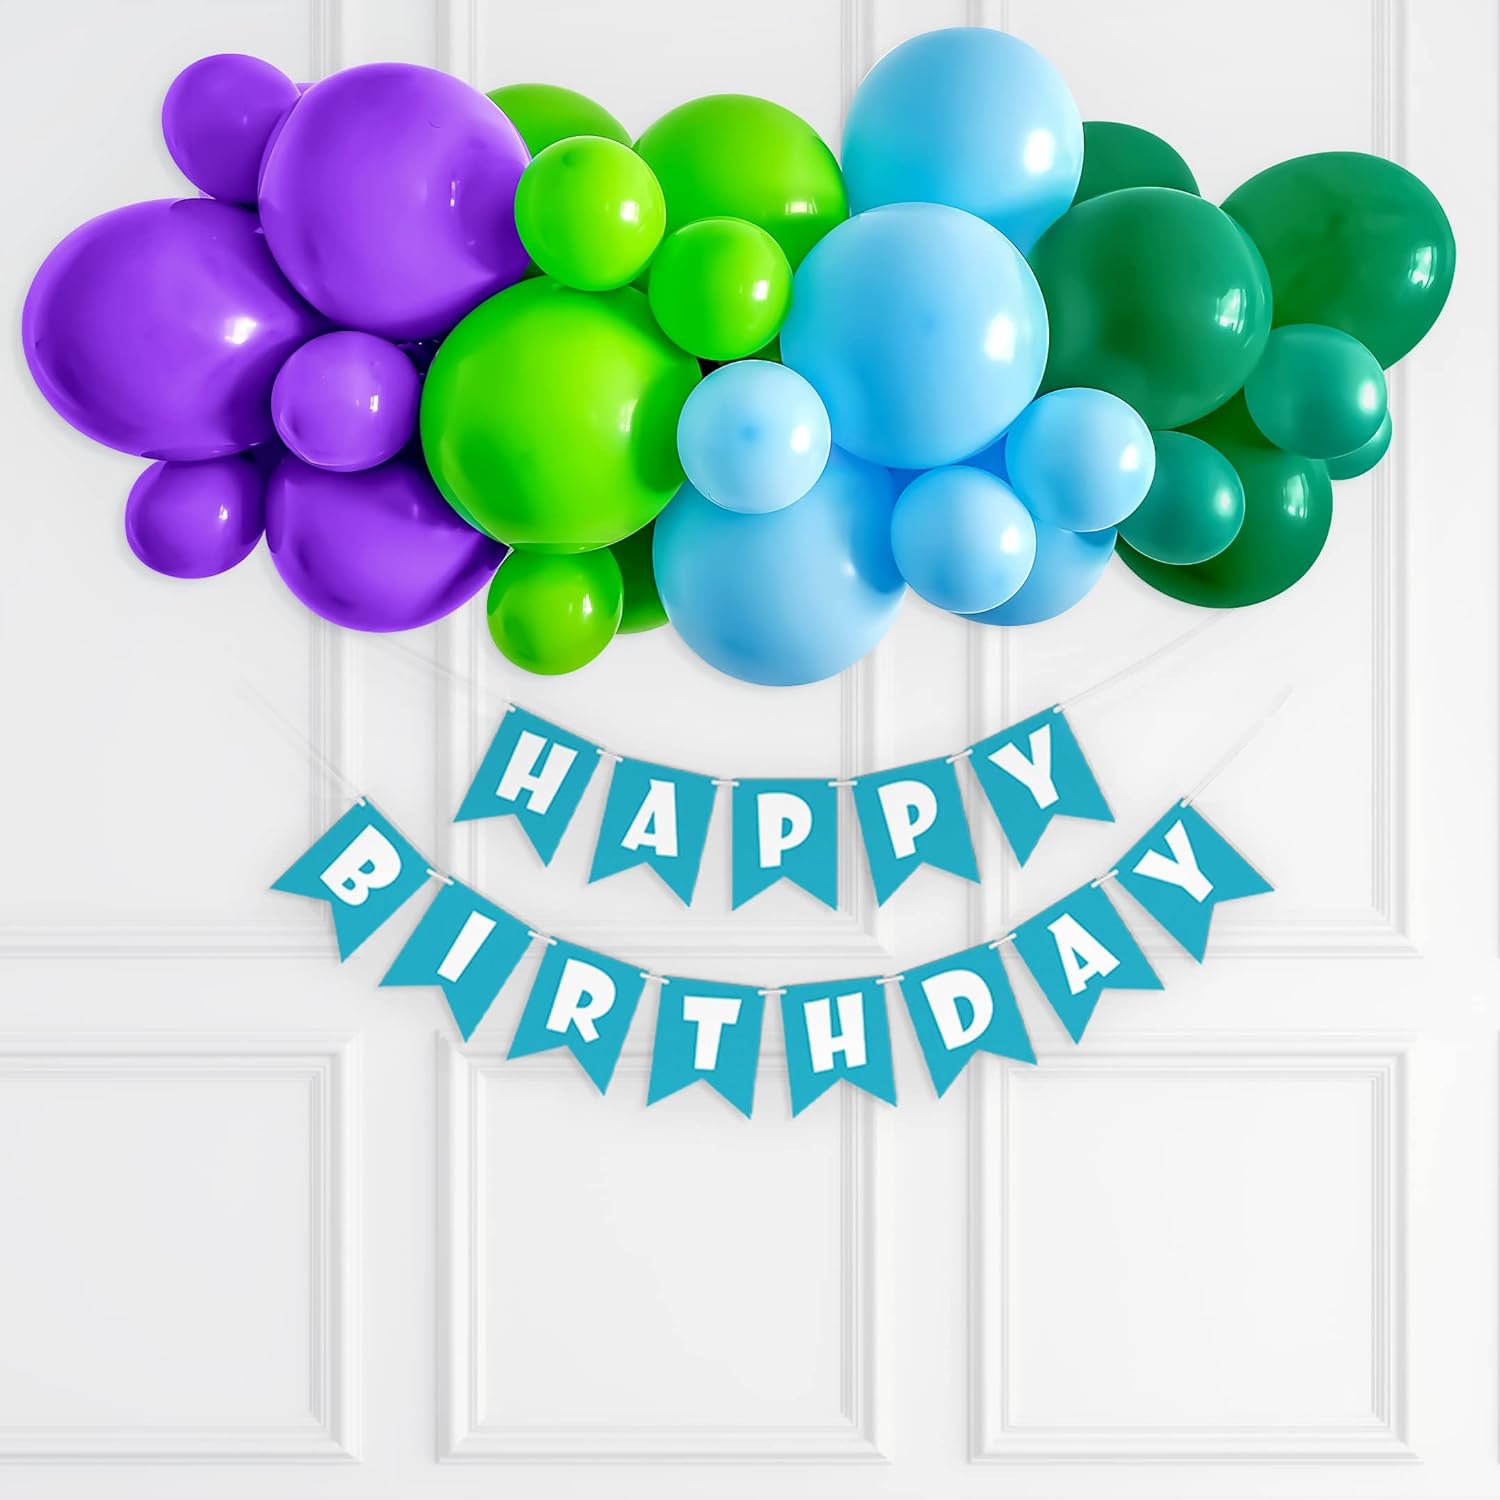 Babies Birthday Decoration with vibrant colors